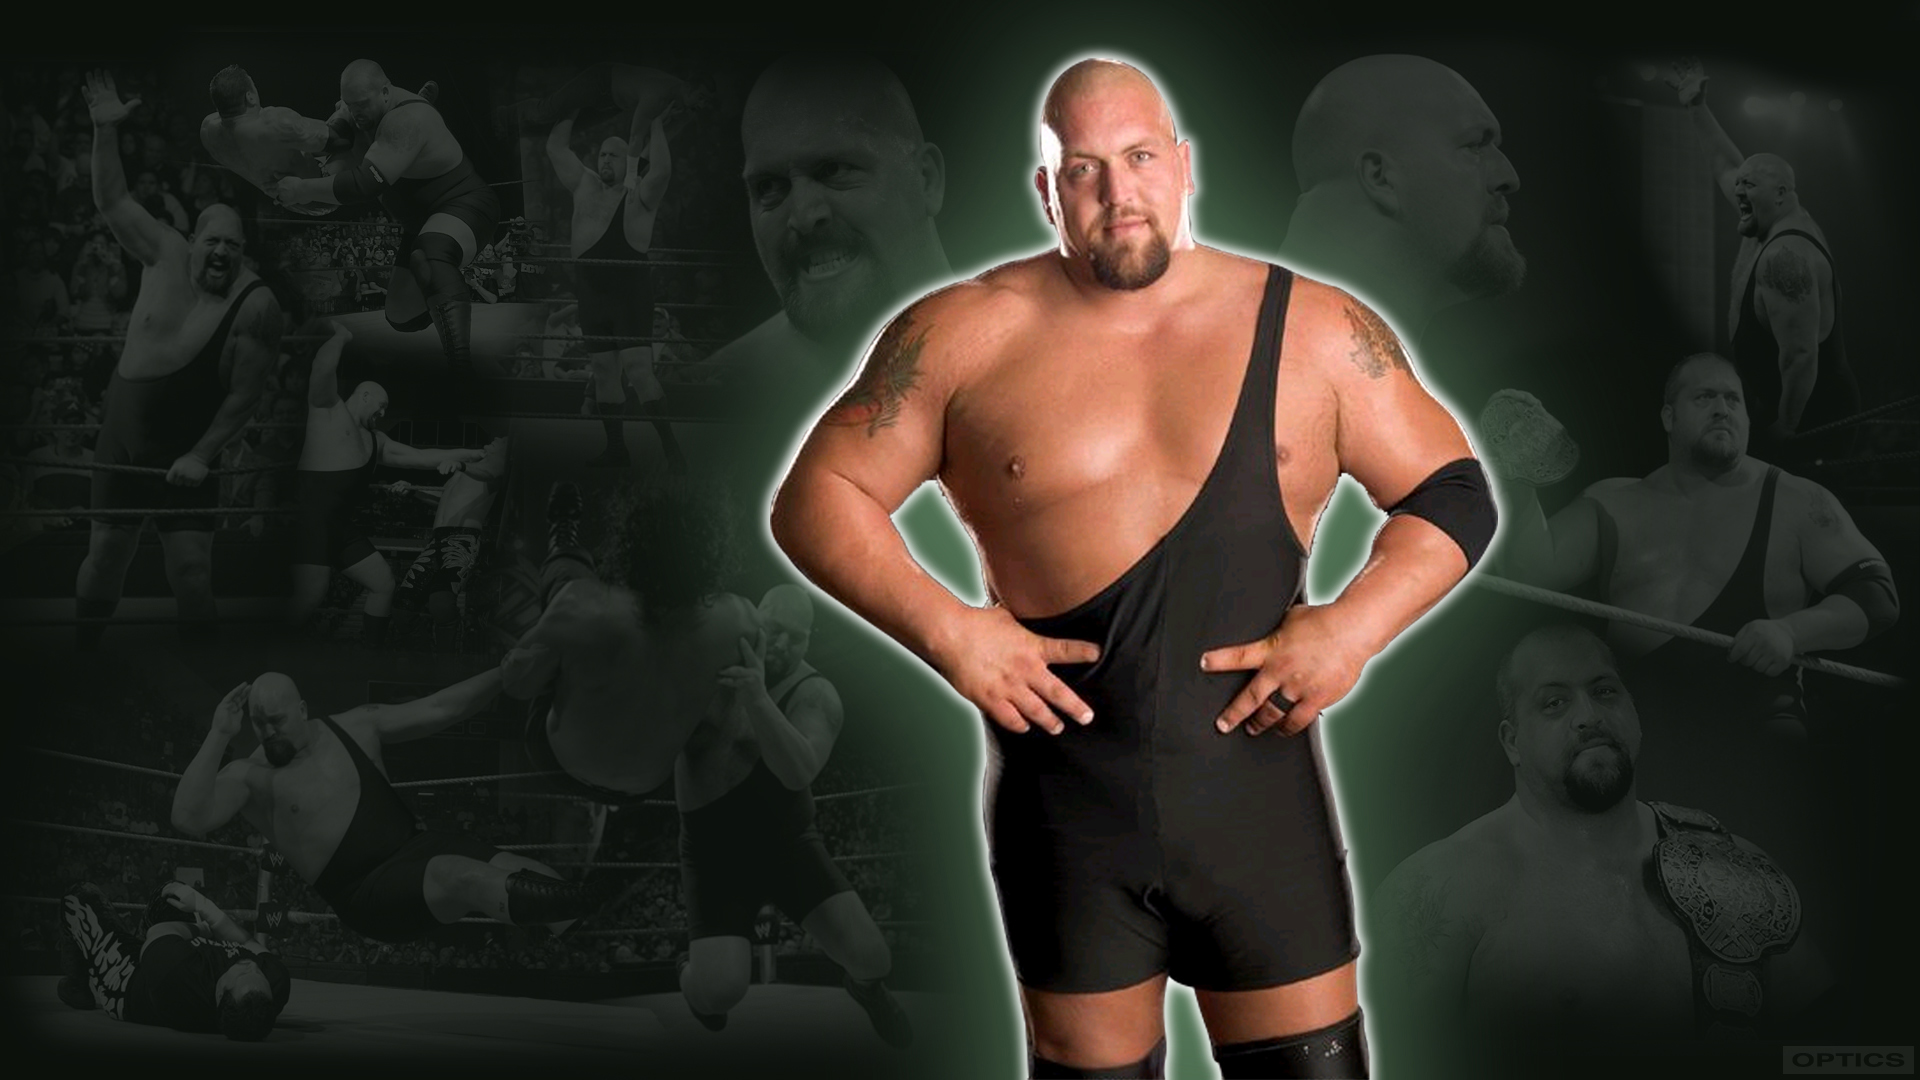 The Big Show   WWE Wallpaper by 0PT1C5 on